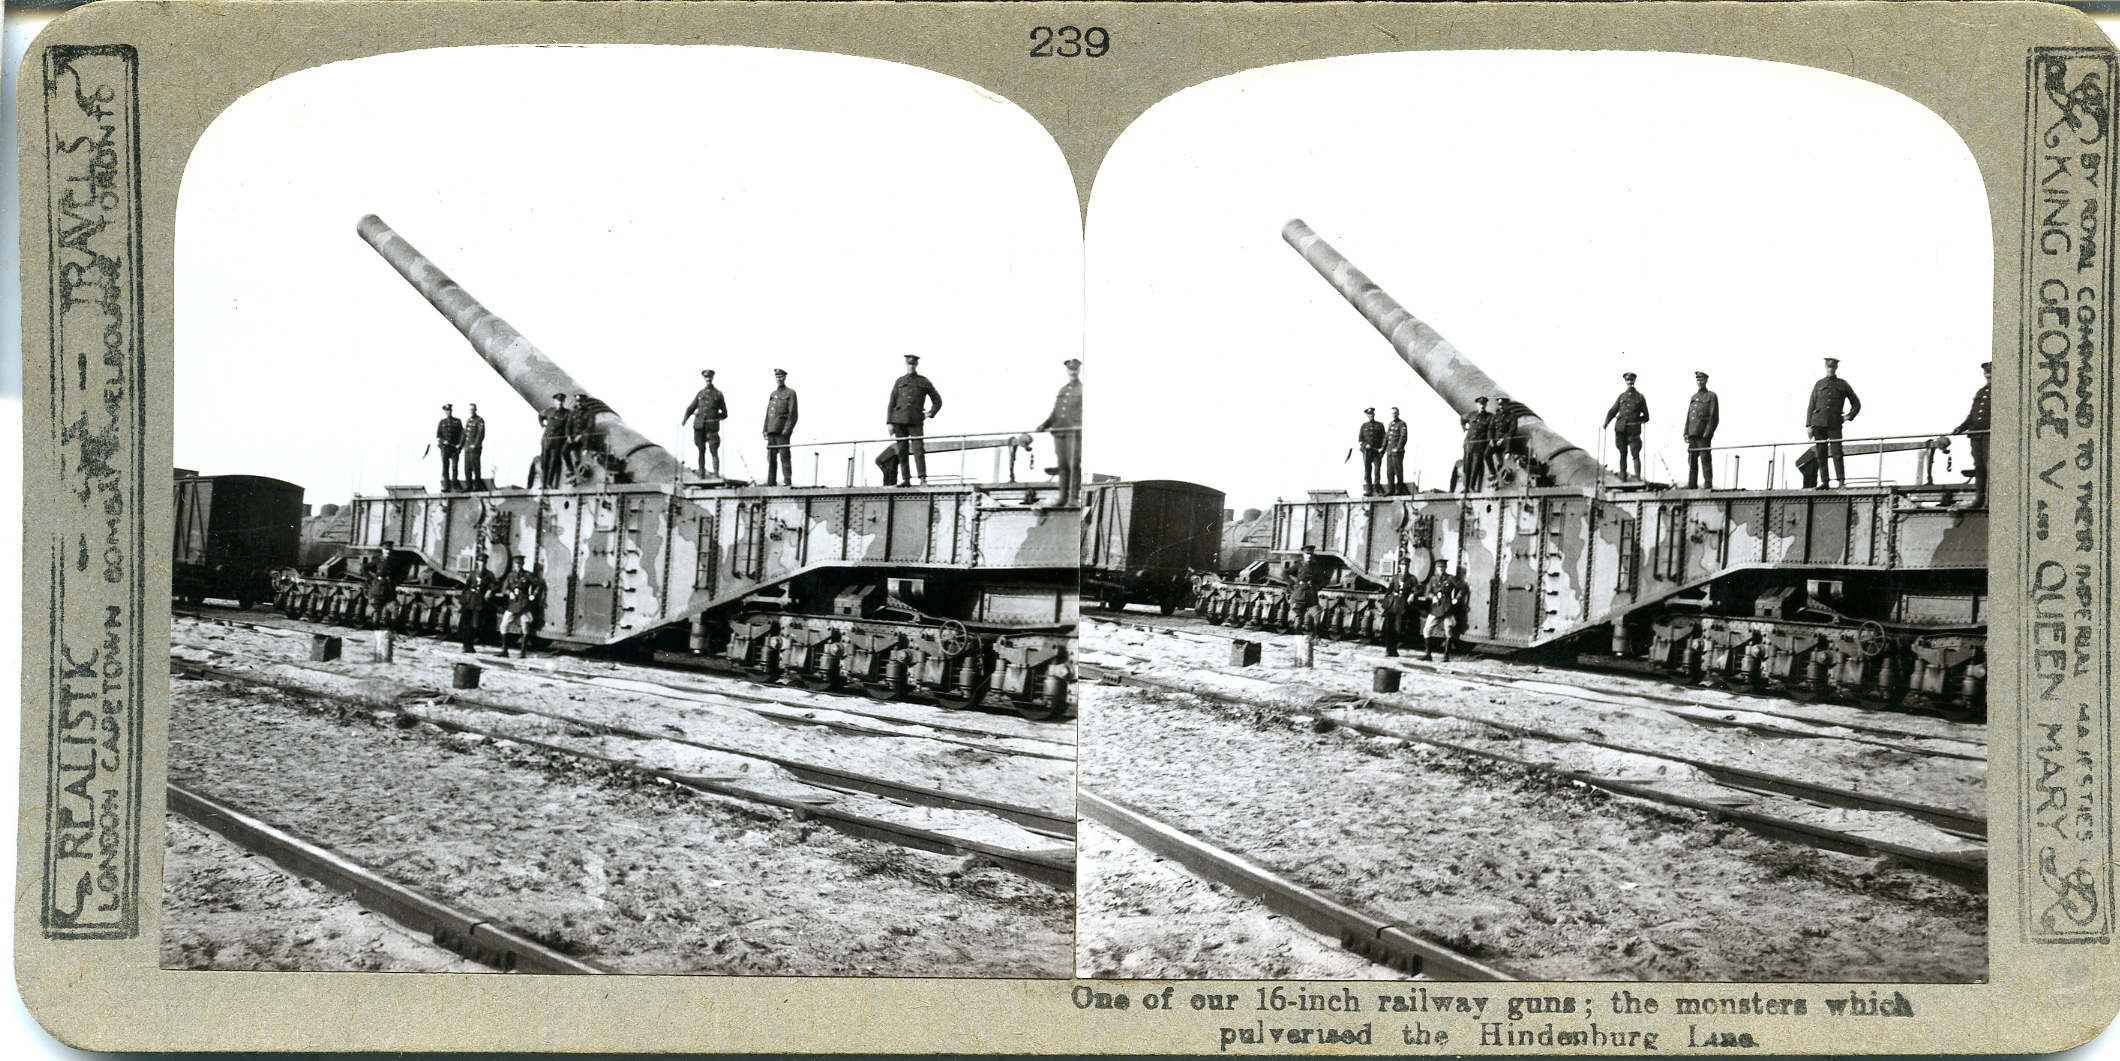 One of our 16-inch railway guns: the monsters which pulverised the Hindenburg Line